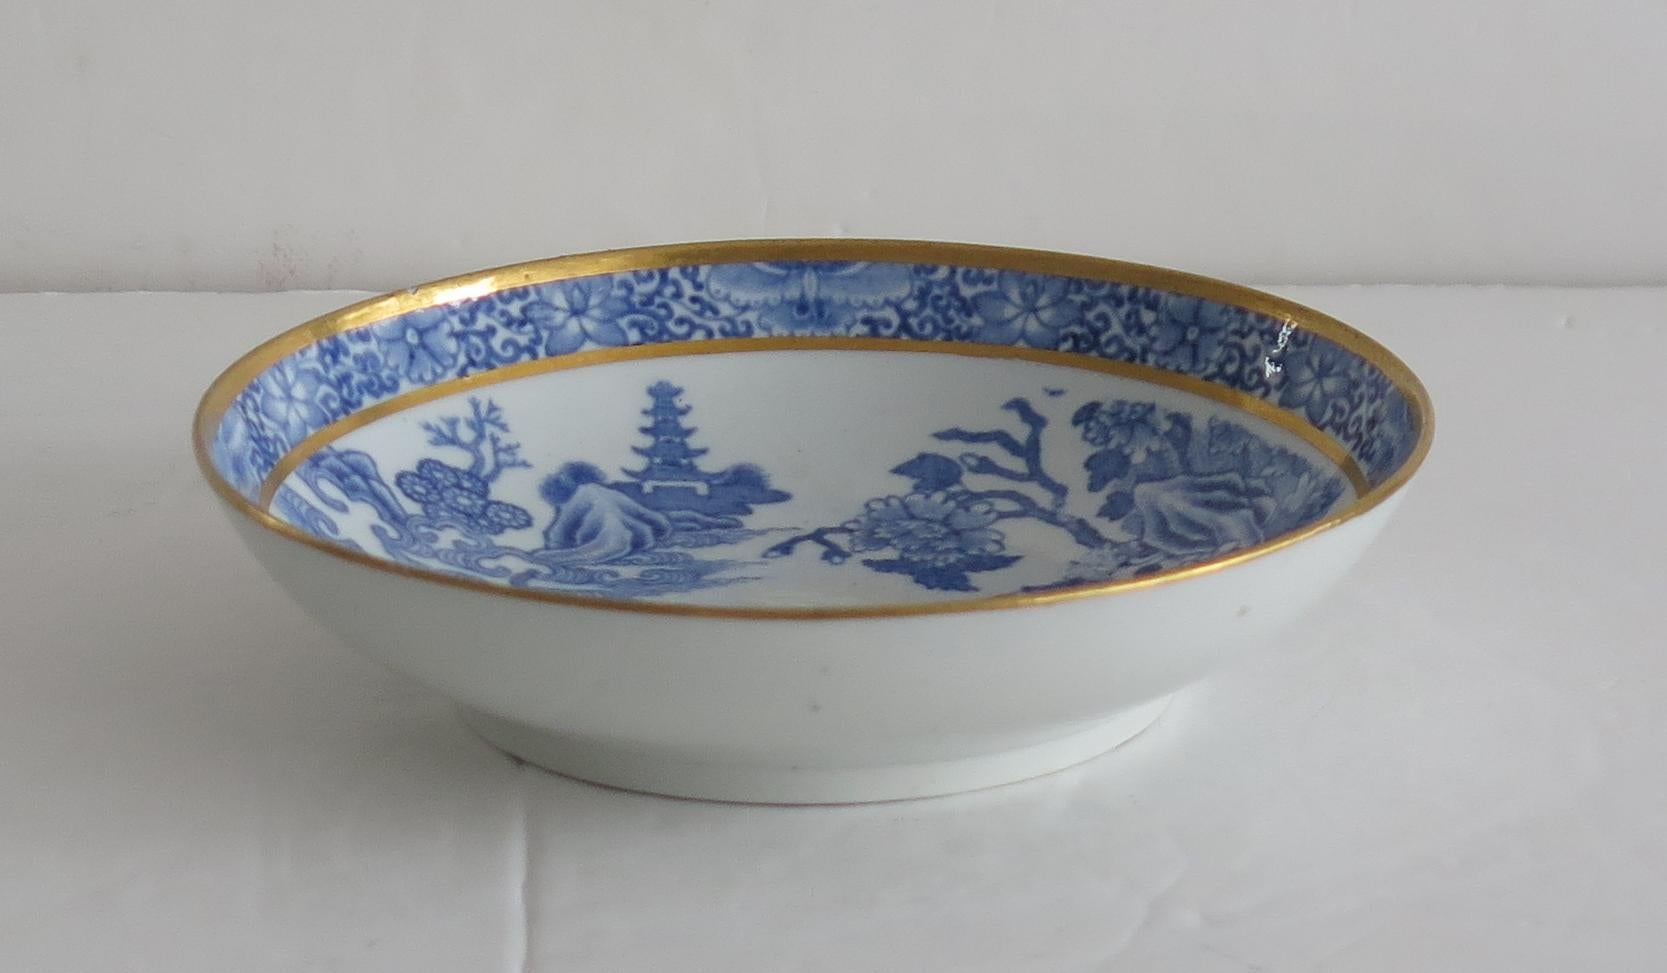 English Rare John Turner Porcelain Cup and Saucer in Traveller Pattern, circa 1795 For Sale